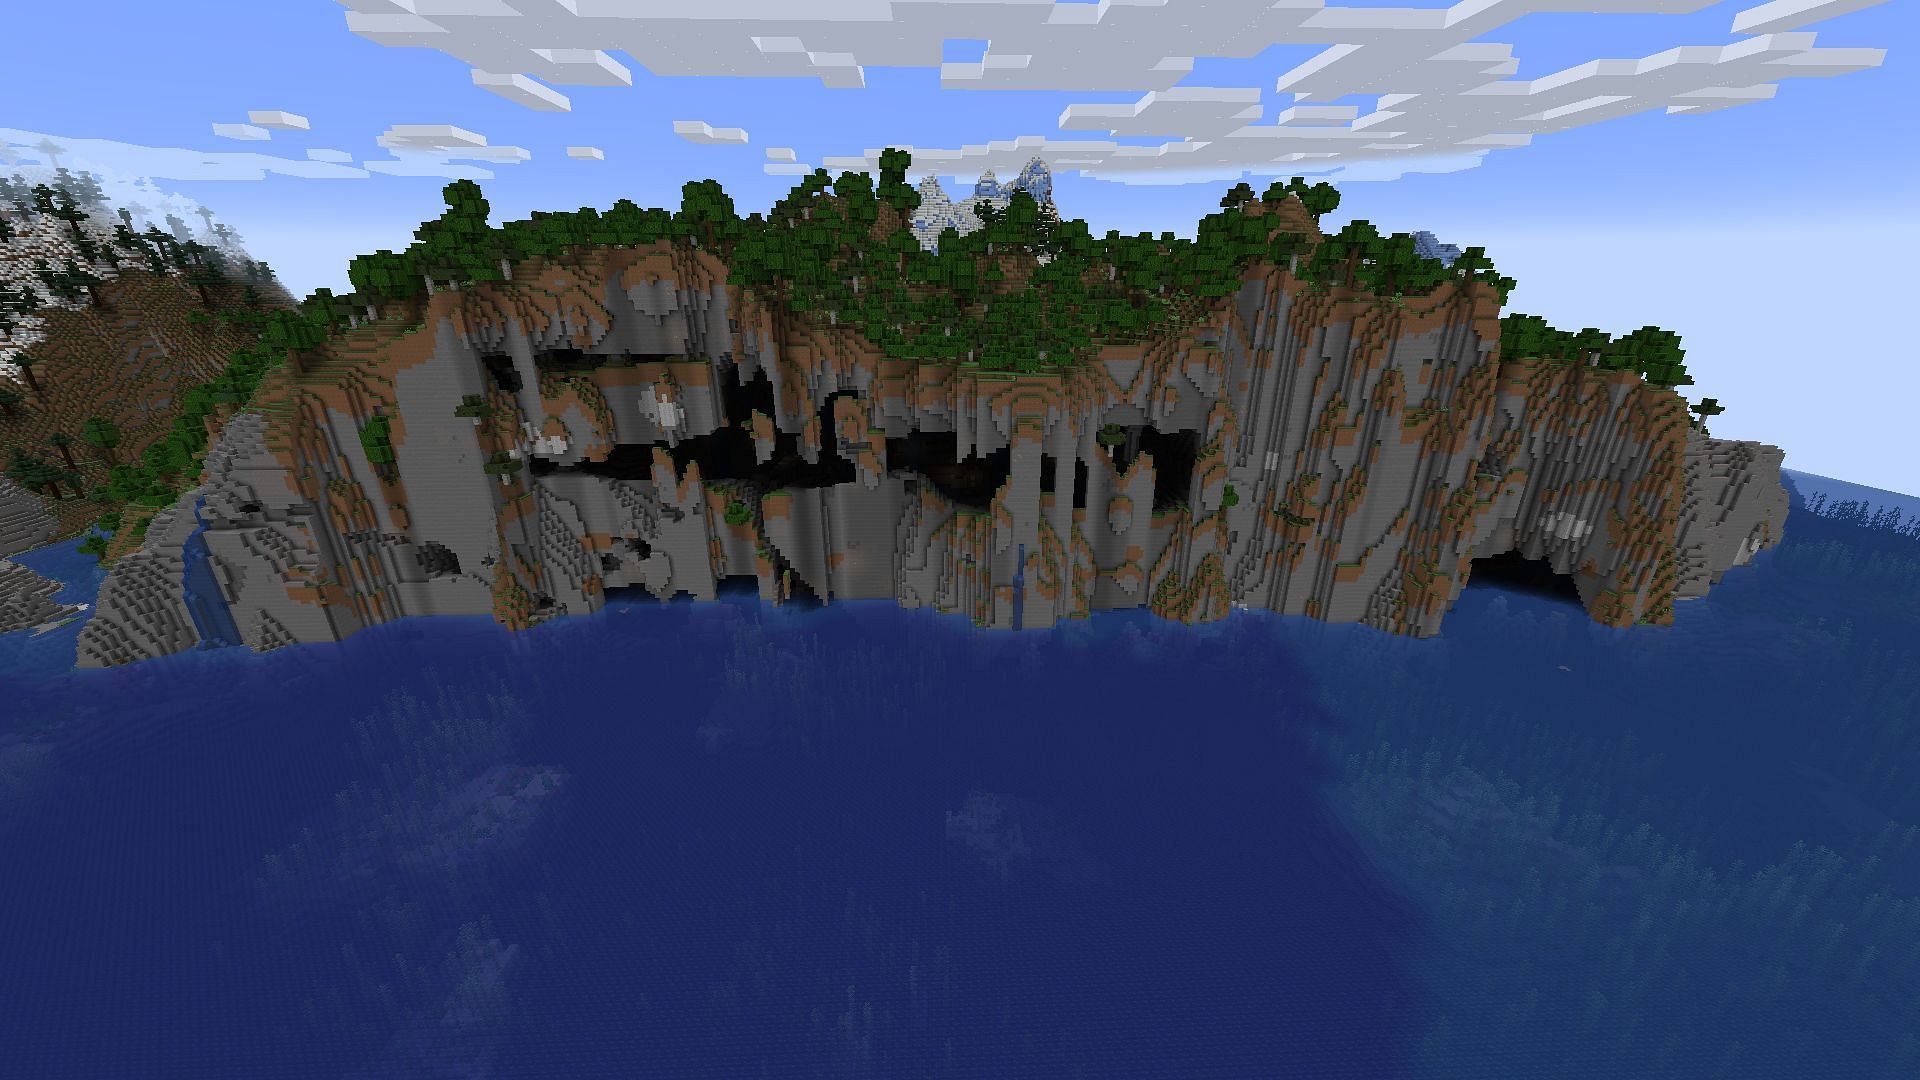 Minecraft spelunkers may find plenty of places to explore and battle on this seed&#039;s spawn landmass (Image via Mojang)